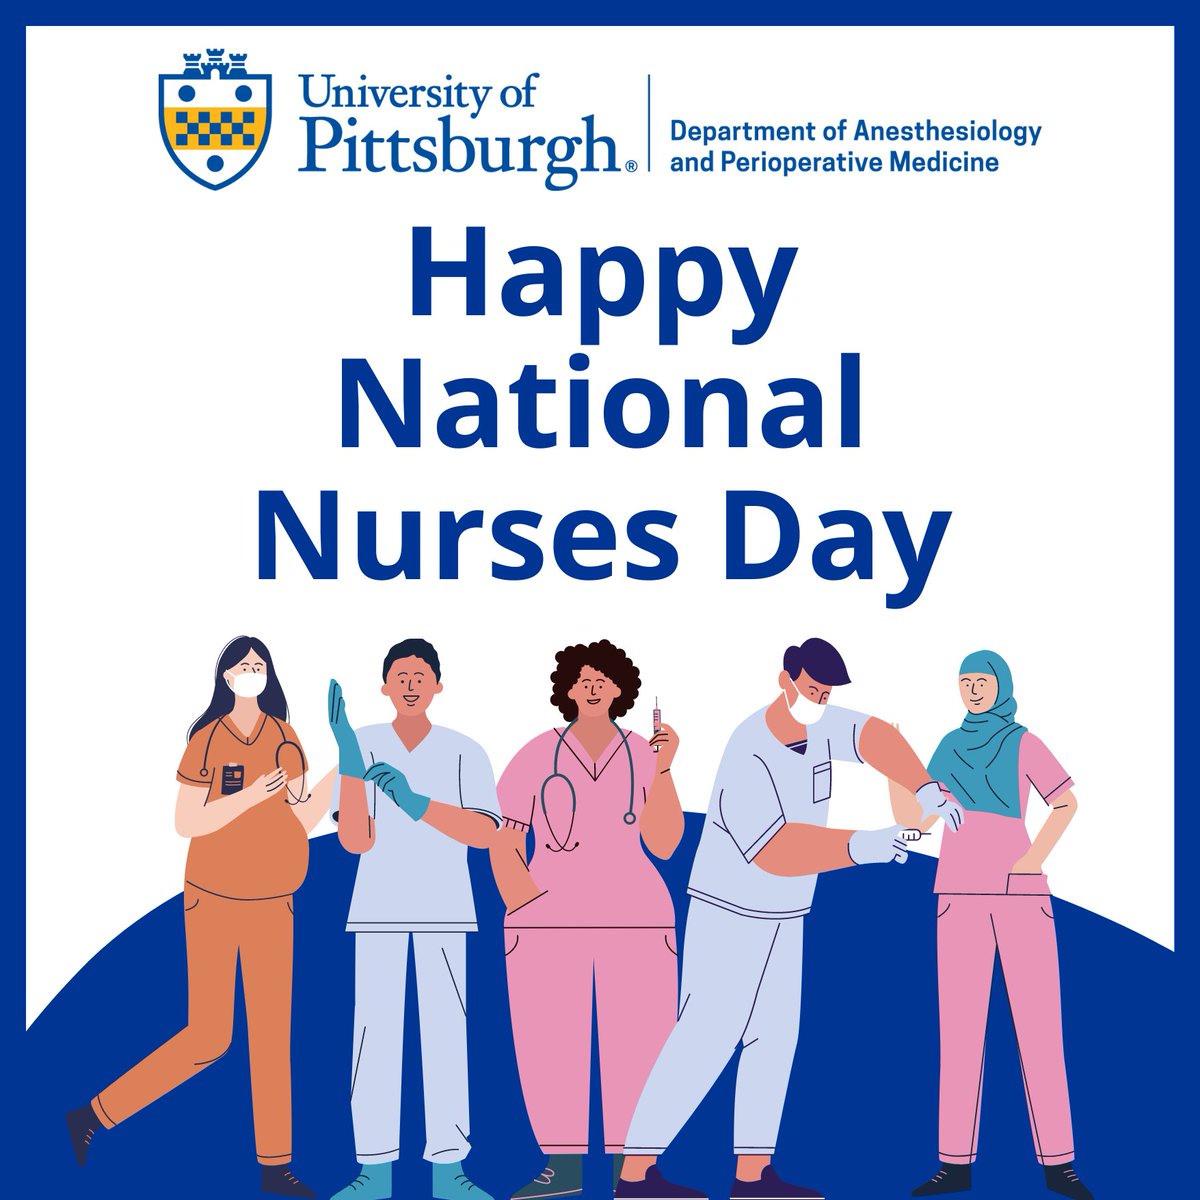 Happy #NationalNursesDay! Today, we celebrate the tireless dedication of all nurses, including the incredible #CRNAs, #CRNPs, #RNs, and all other nurses in our department, whose expertise ensures safe anesthesia care across healthcare settings. Thank you for your unwavering…